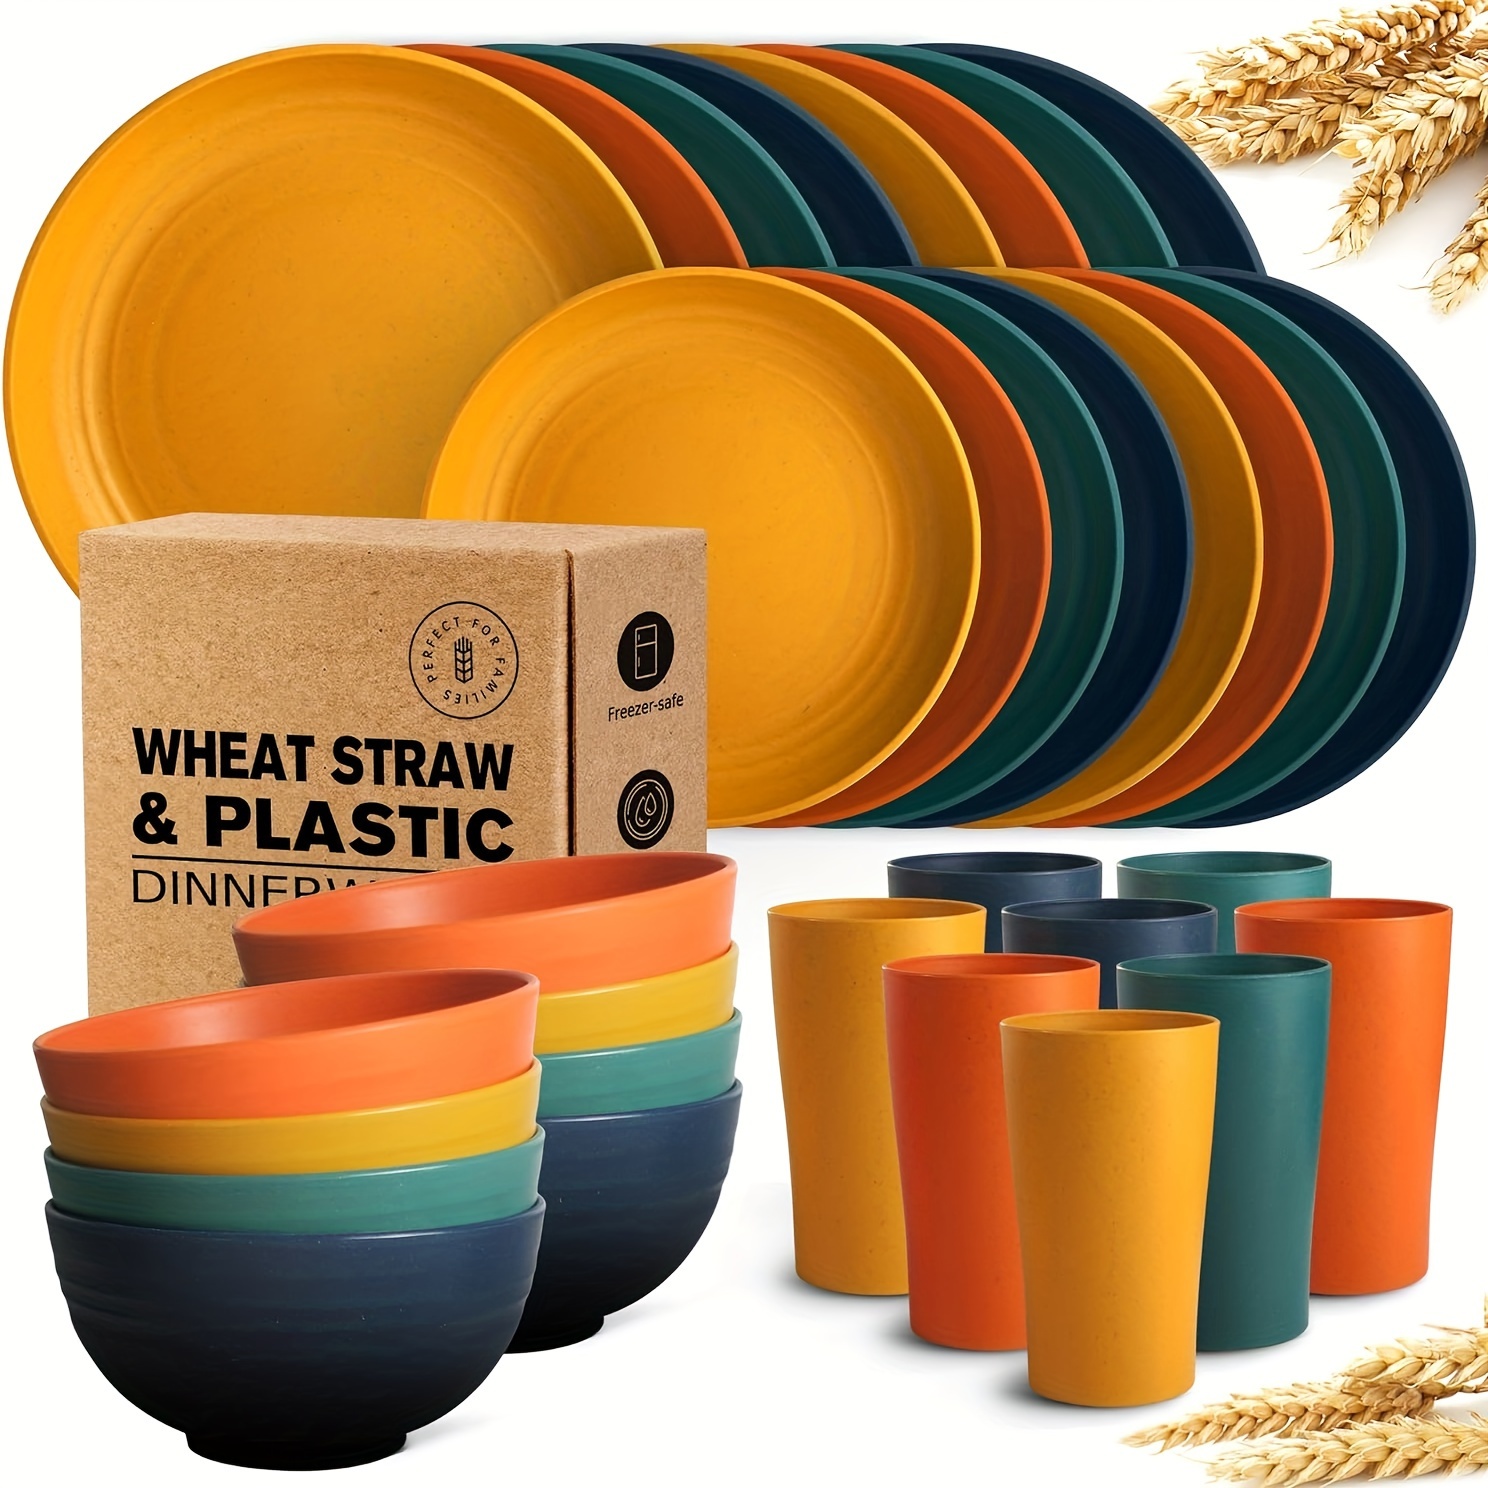 

32-piece Kitchen Plastic Wheat Straw Dinnerware Set, Service For 8, Dinner Plates, Dessert Plate, Cereal Bowls, Cups, Unbreakable Colorful Plastic Outdoor Camping Dishes, Autumn Multicolor